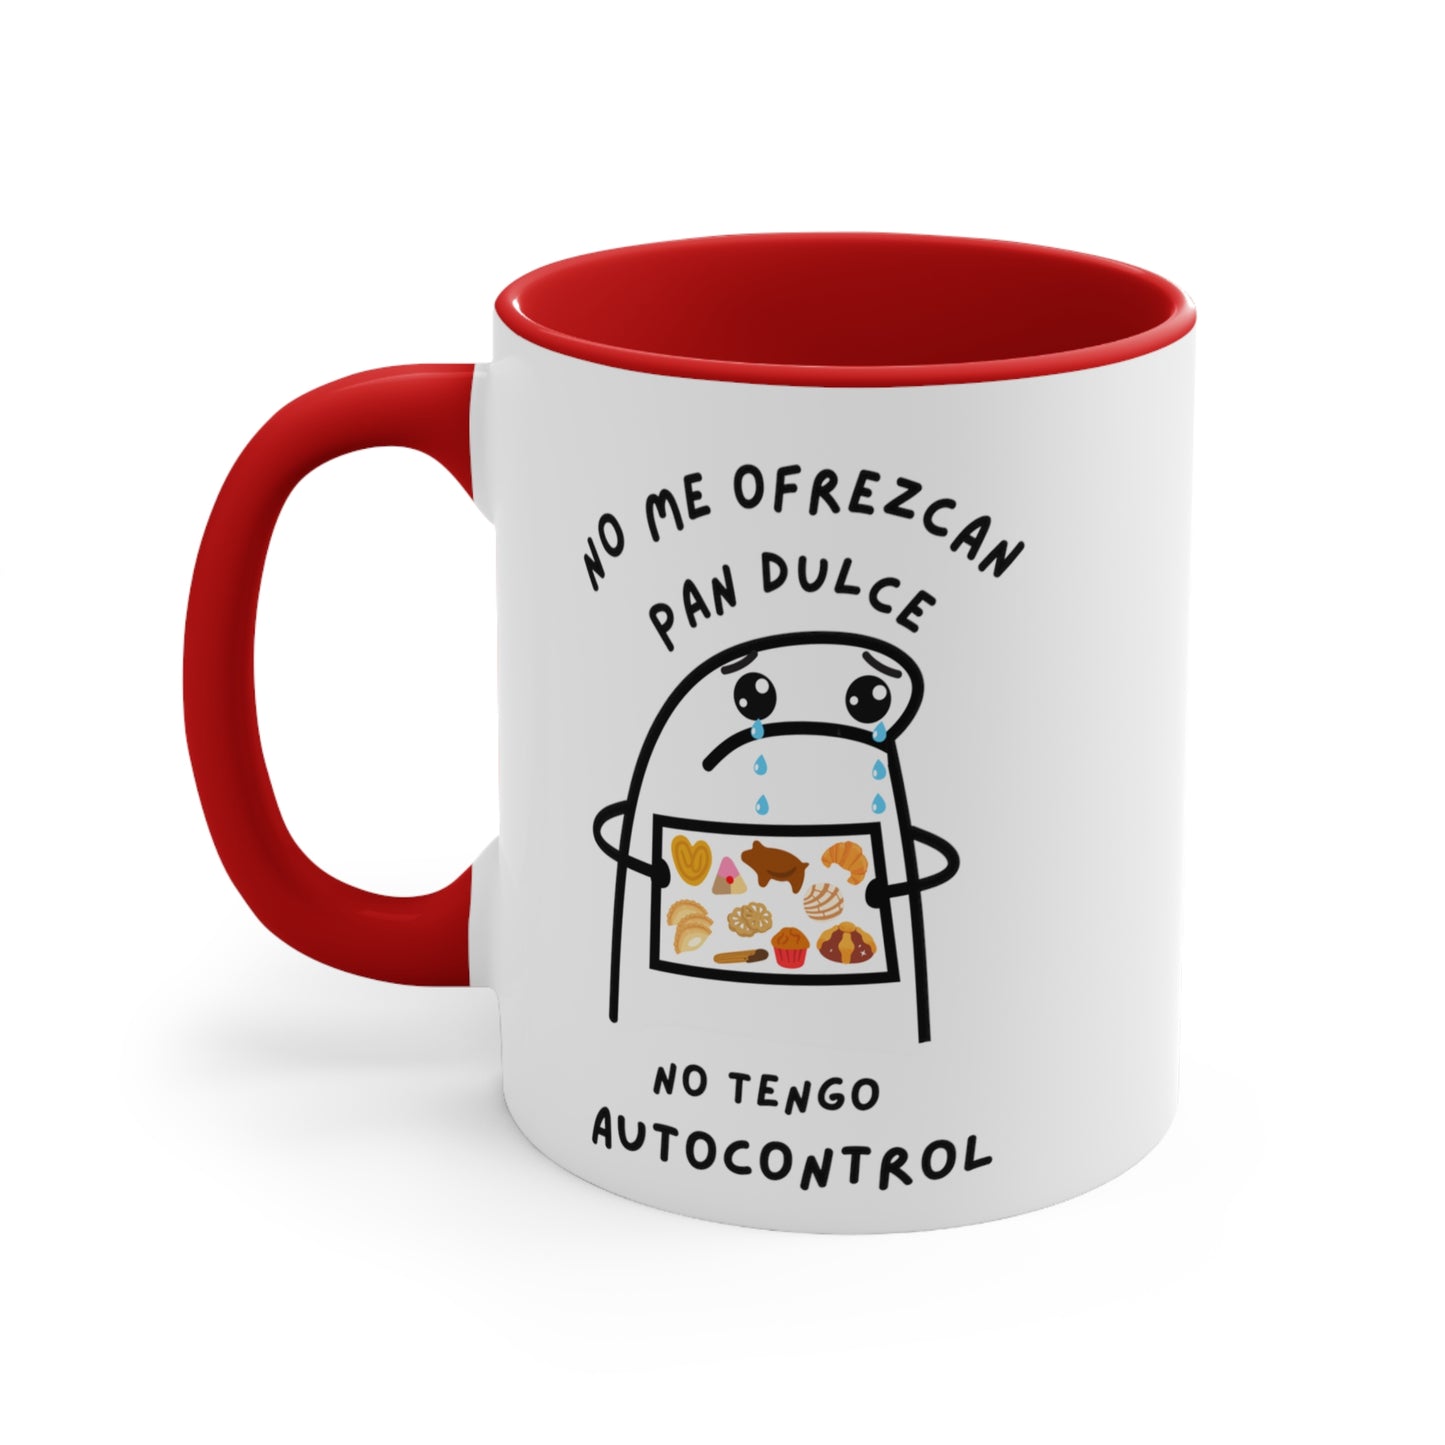 Funny Mexican Coffee Mug, 11oz for Mexican family or friends. No me ofrezcan pan dulce no tengo autocontrol.